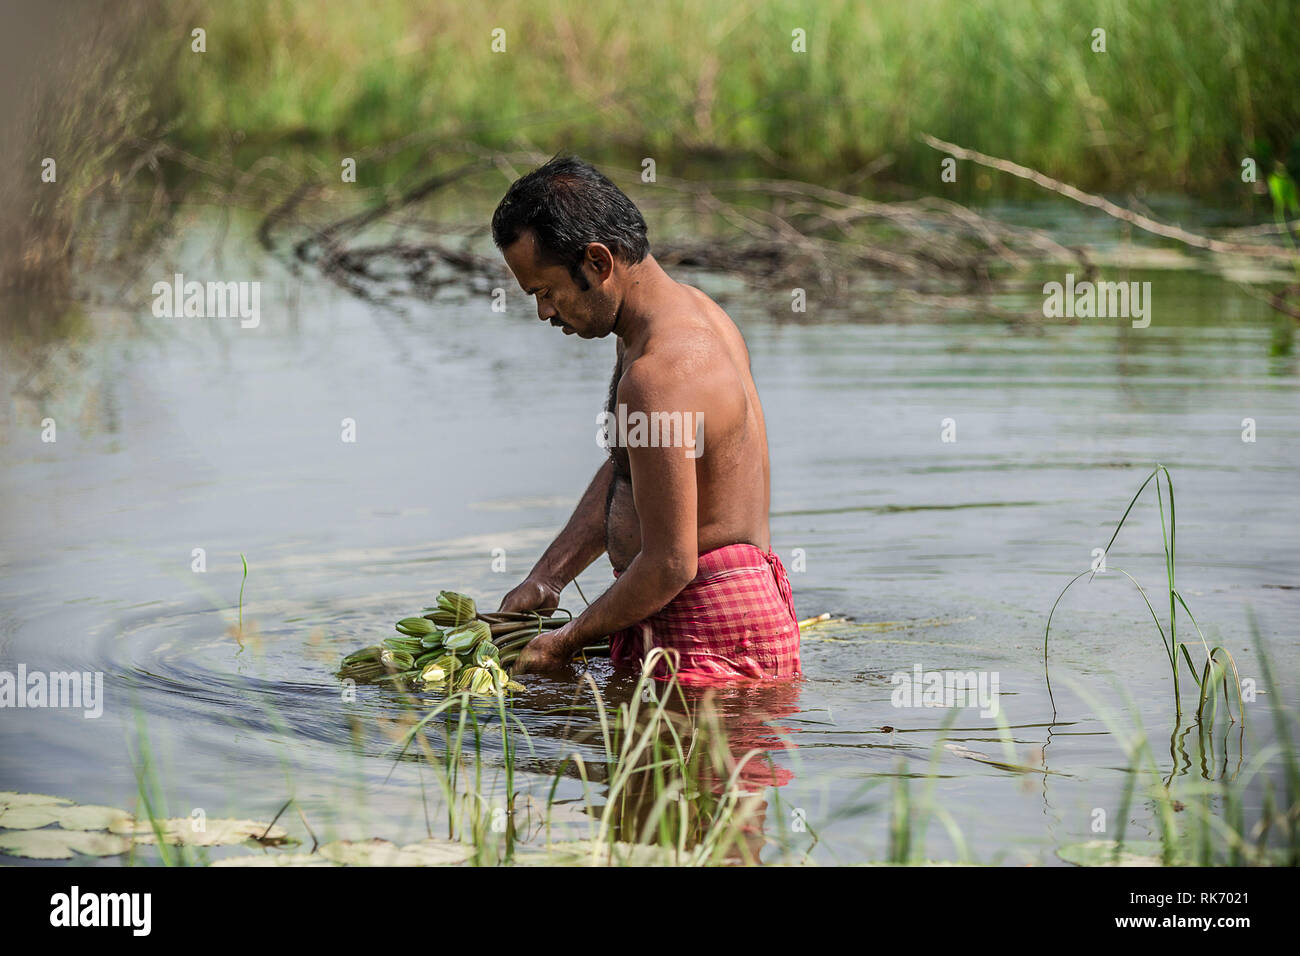 A man with bare chest wades through and collects lotus flowers